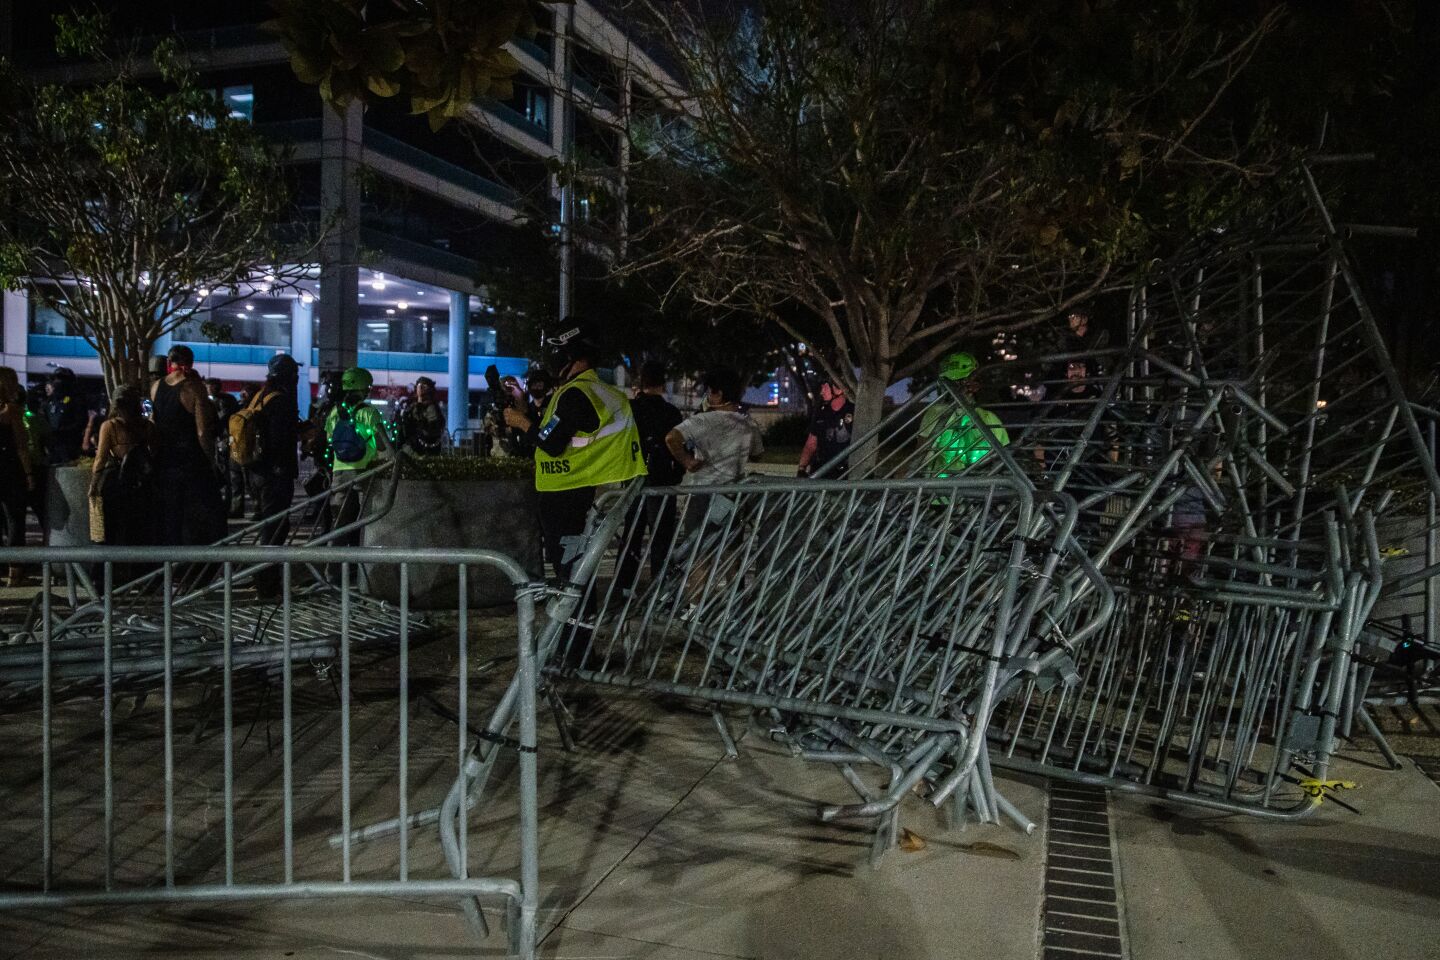 Barricades are piled on top after protesters knocked them down in front of the San Diego Police Department on September 23, 2020.